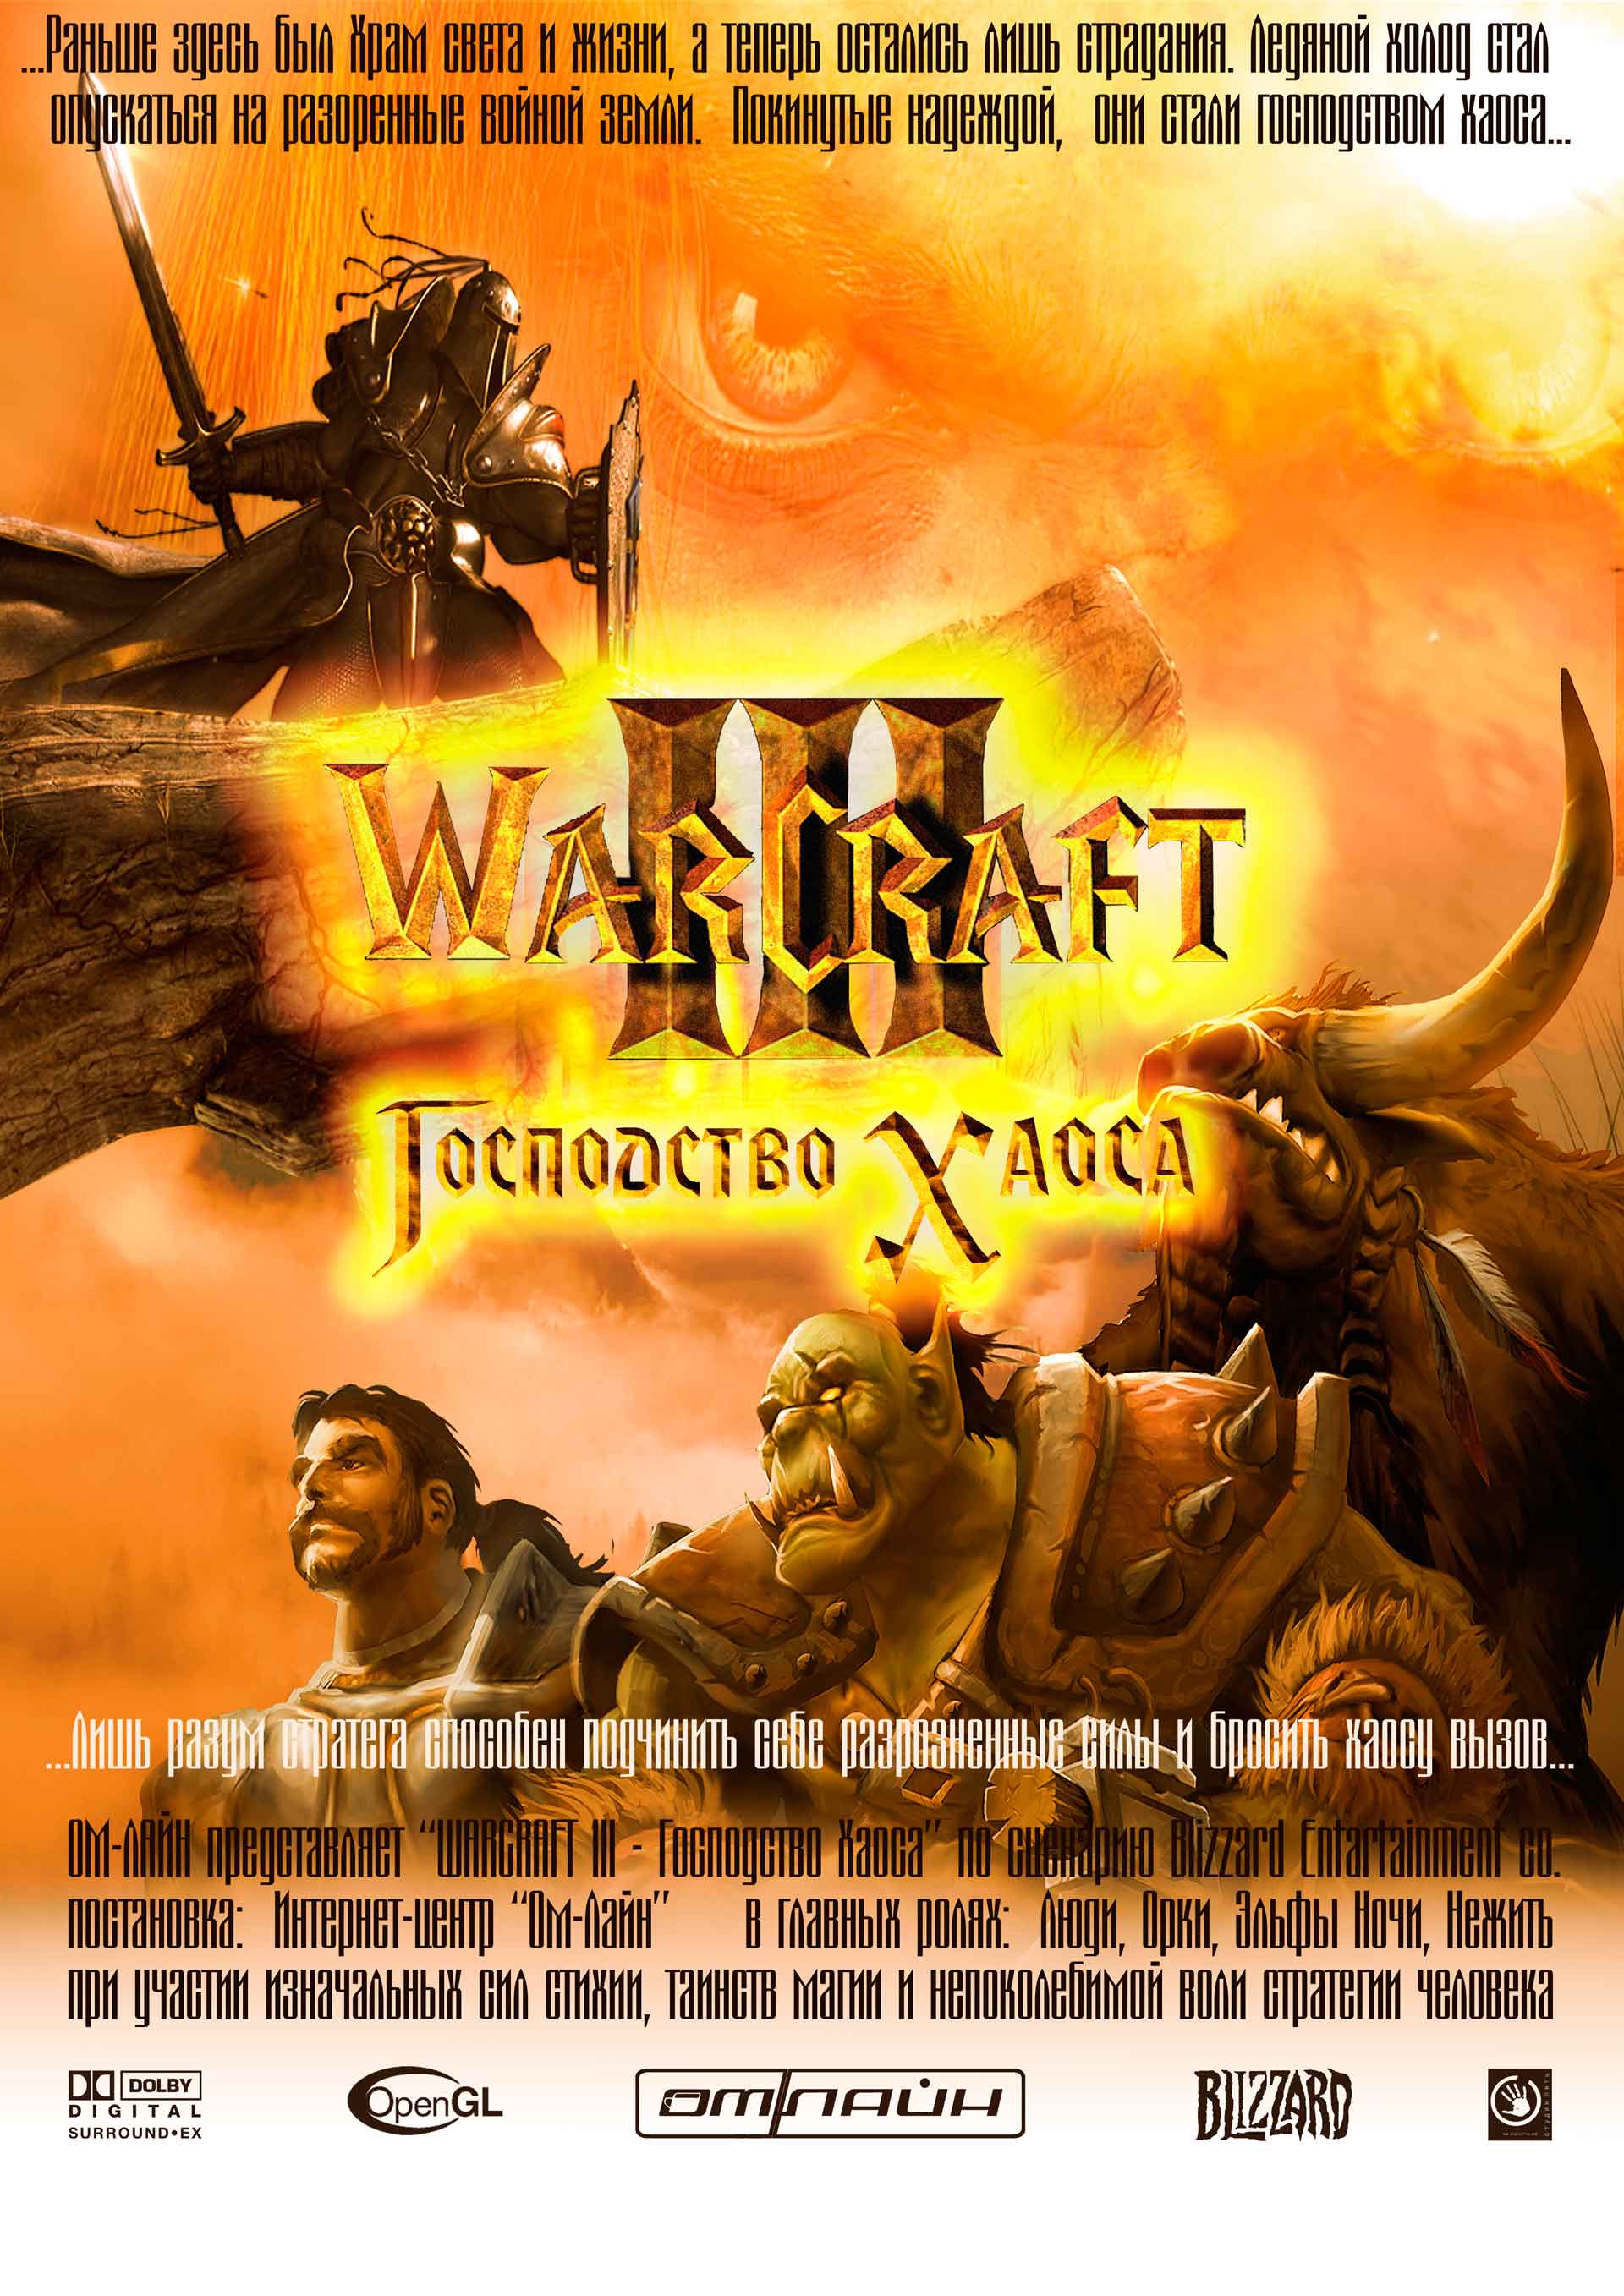 Featured image for “War Craft Tournament Poster”